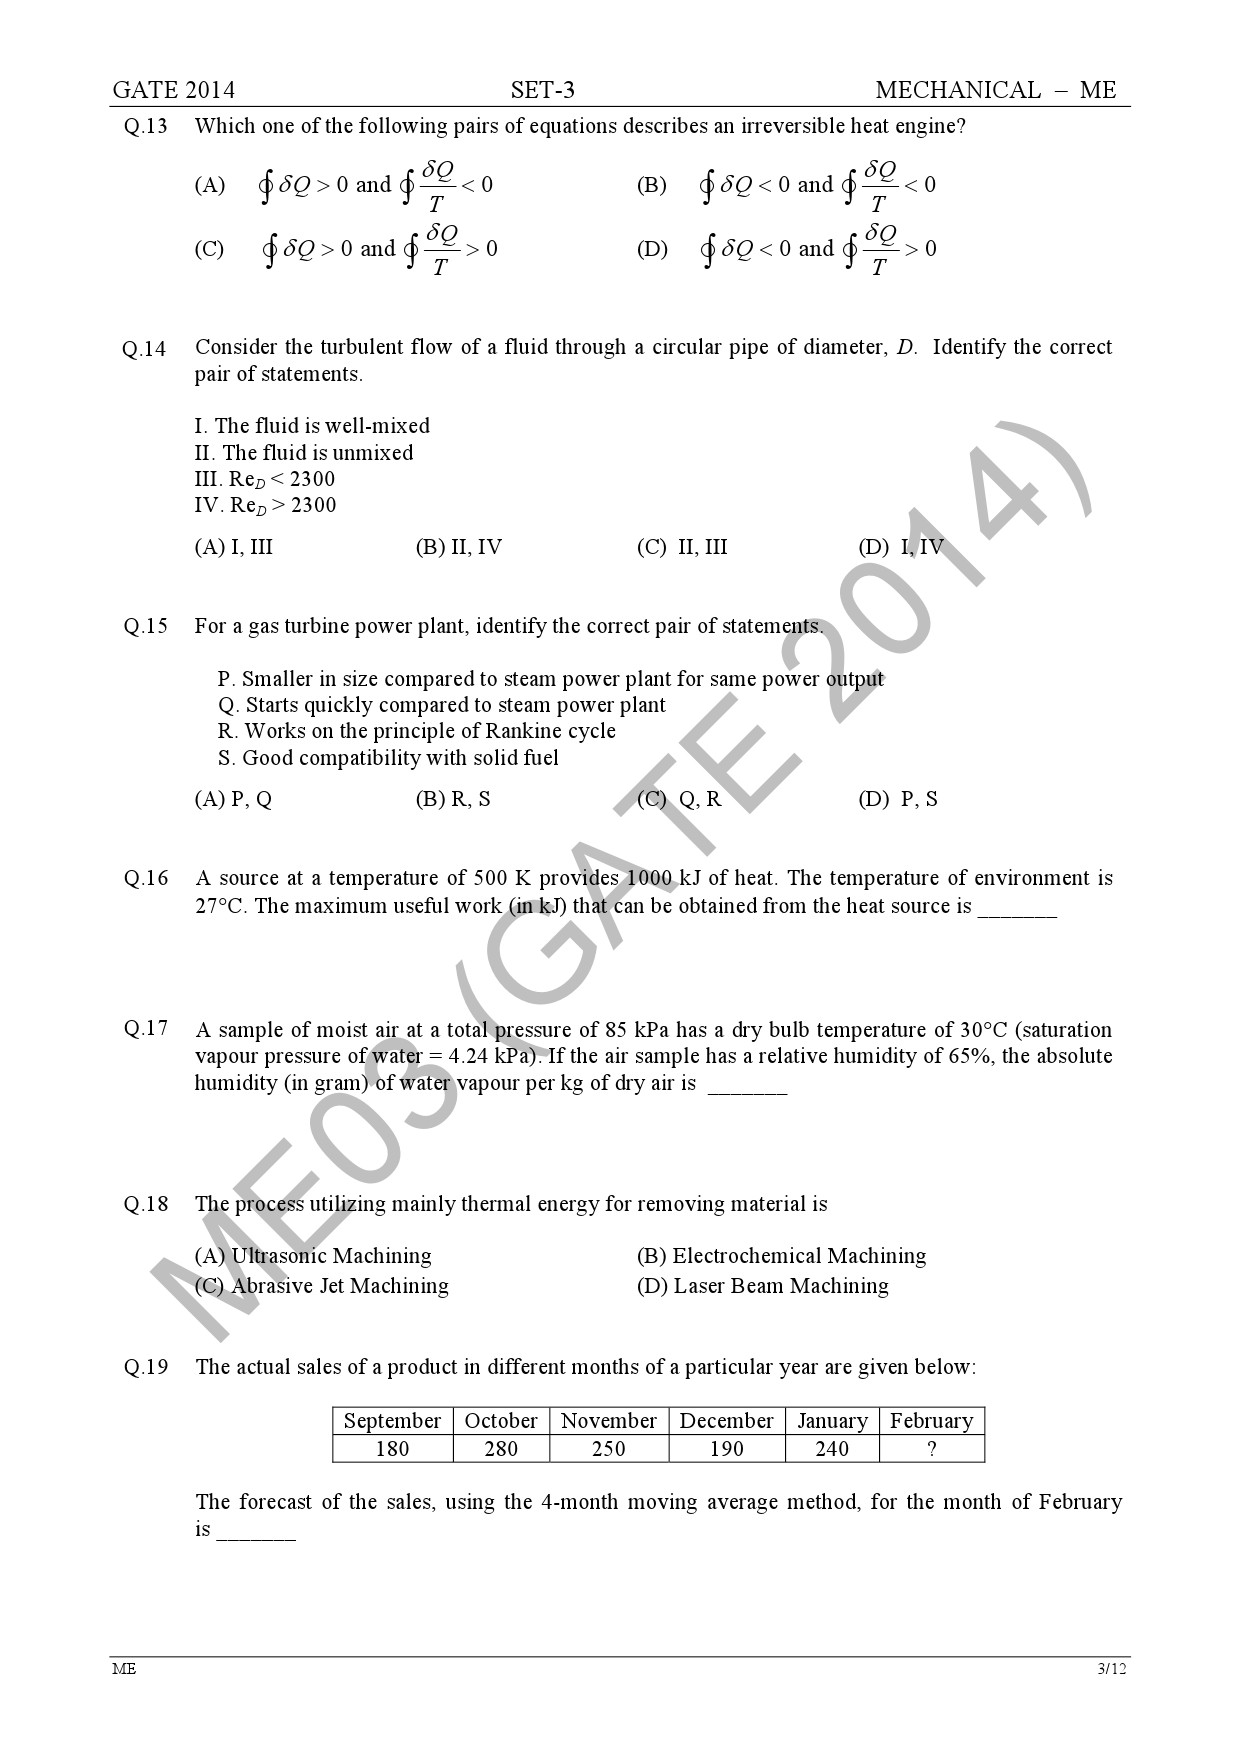 GATE Exam Question Paper 2014 Mechanical Engineering Set 3 10